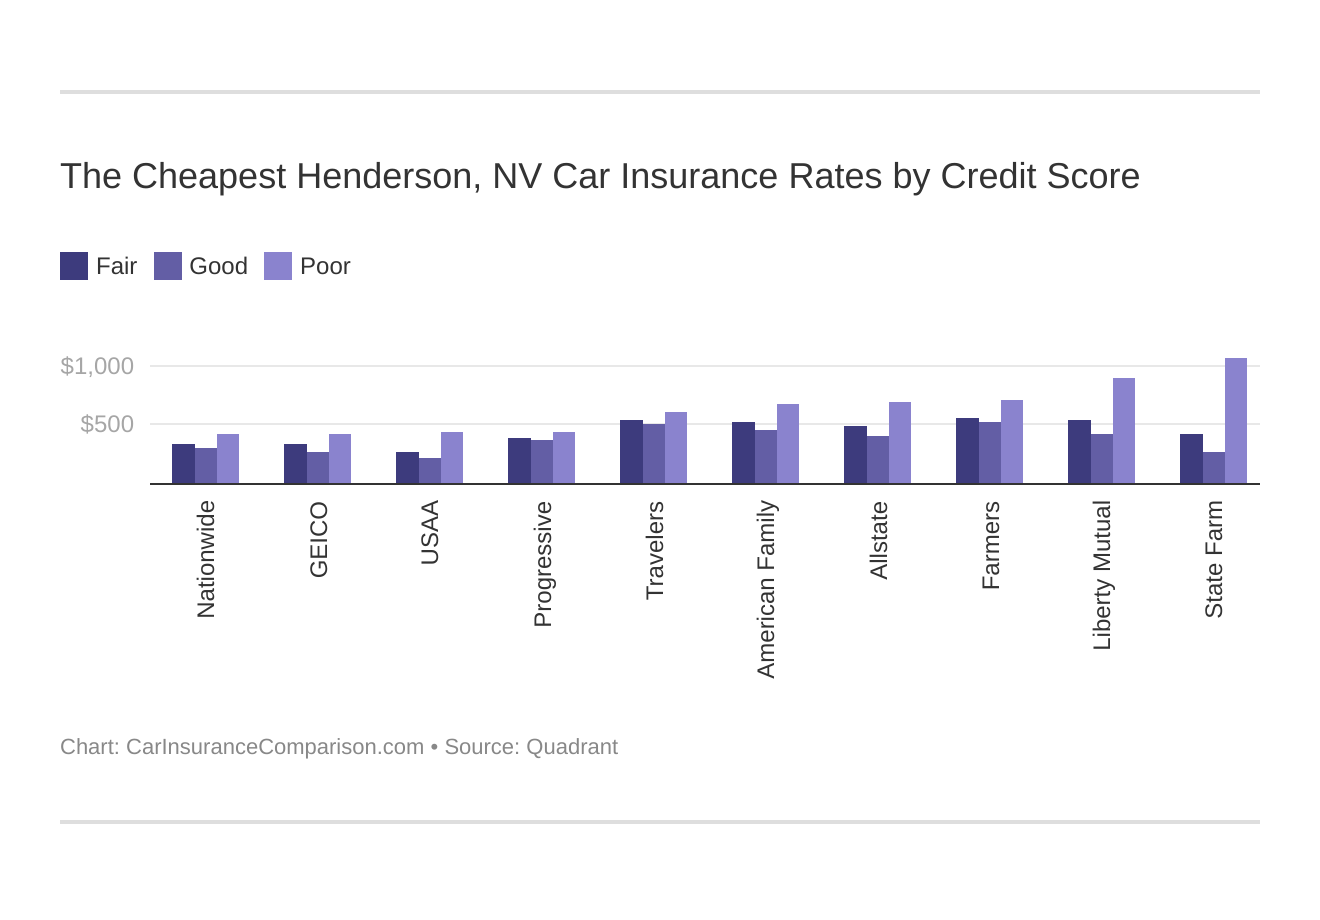 The Cheapest Henderson, NV Car Insurance Rates by Credit Score